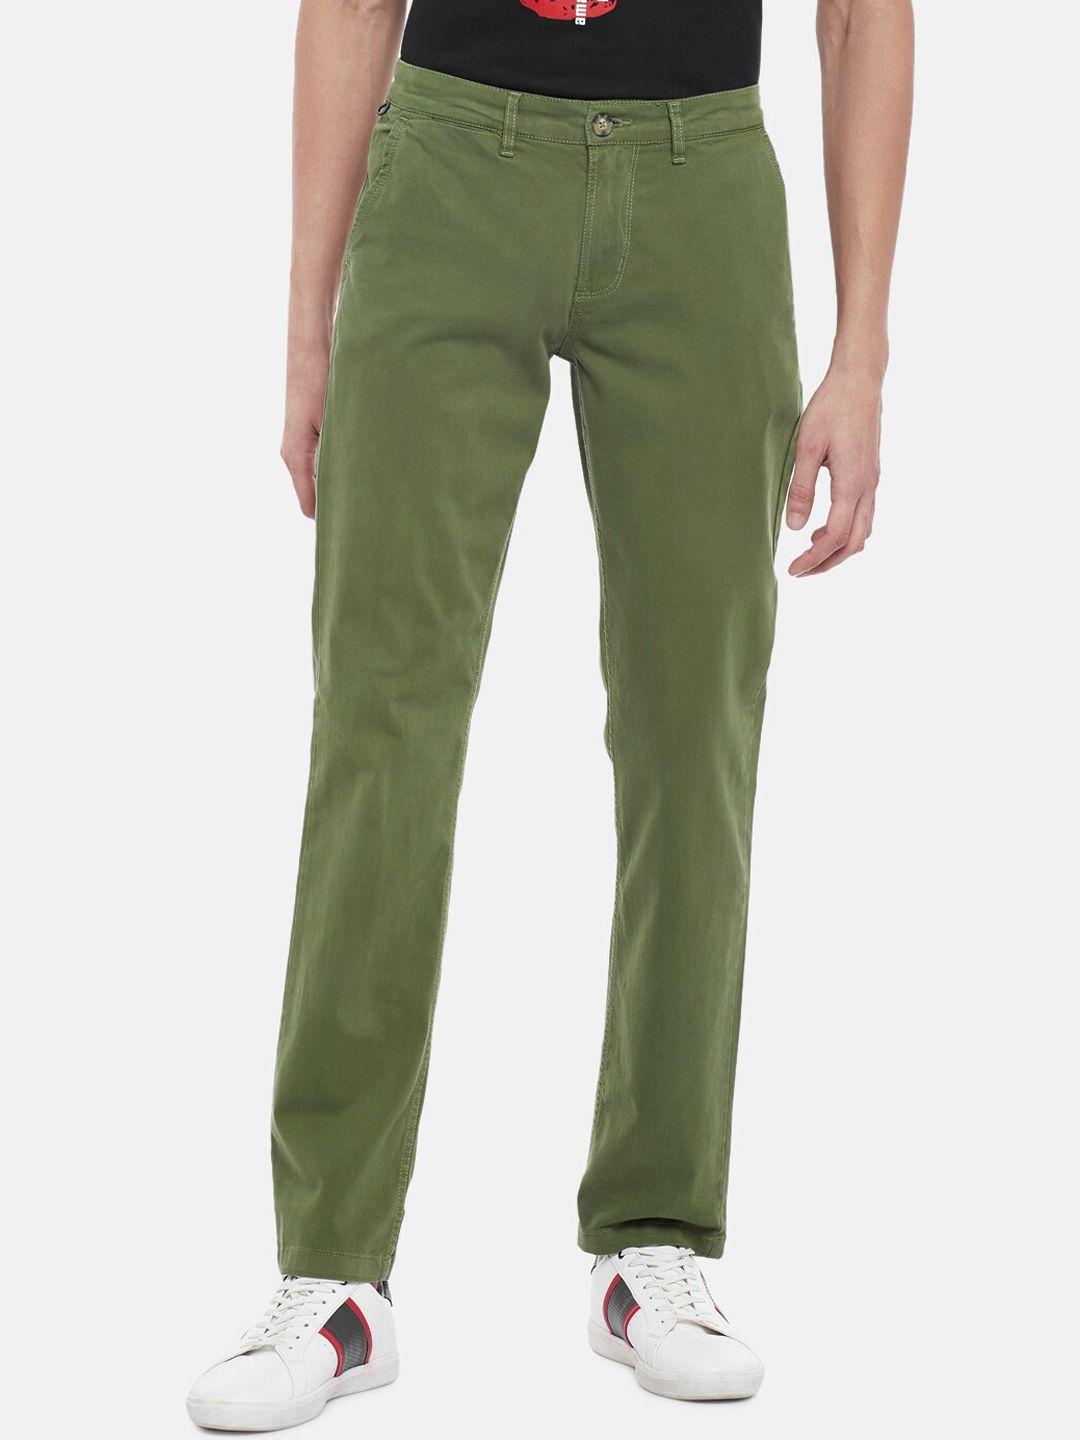 urban ranger by pantaloons men olive green slim fit chinos trousers